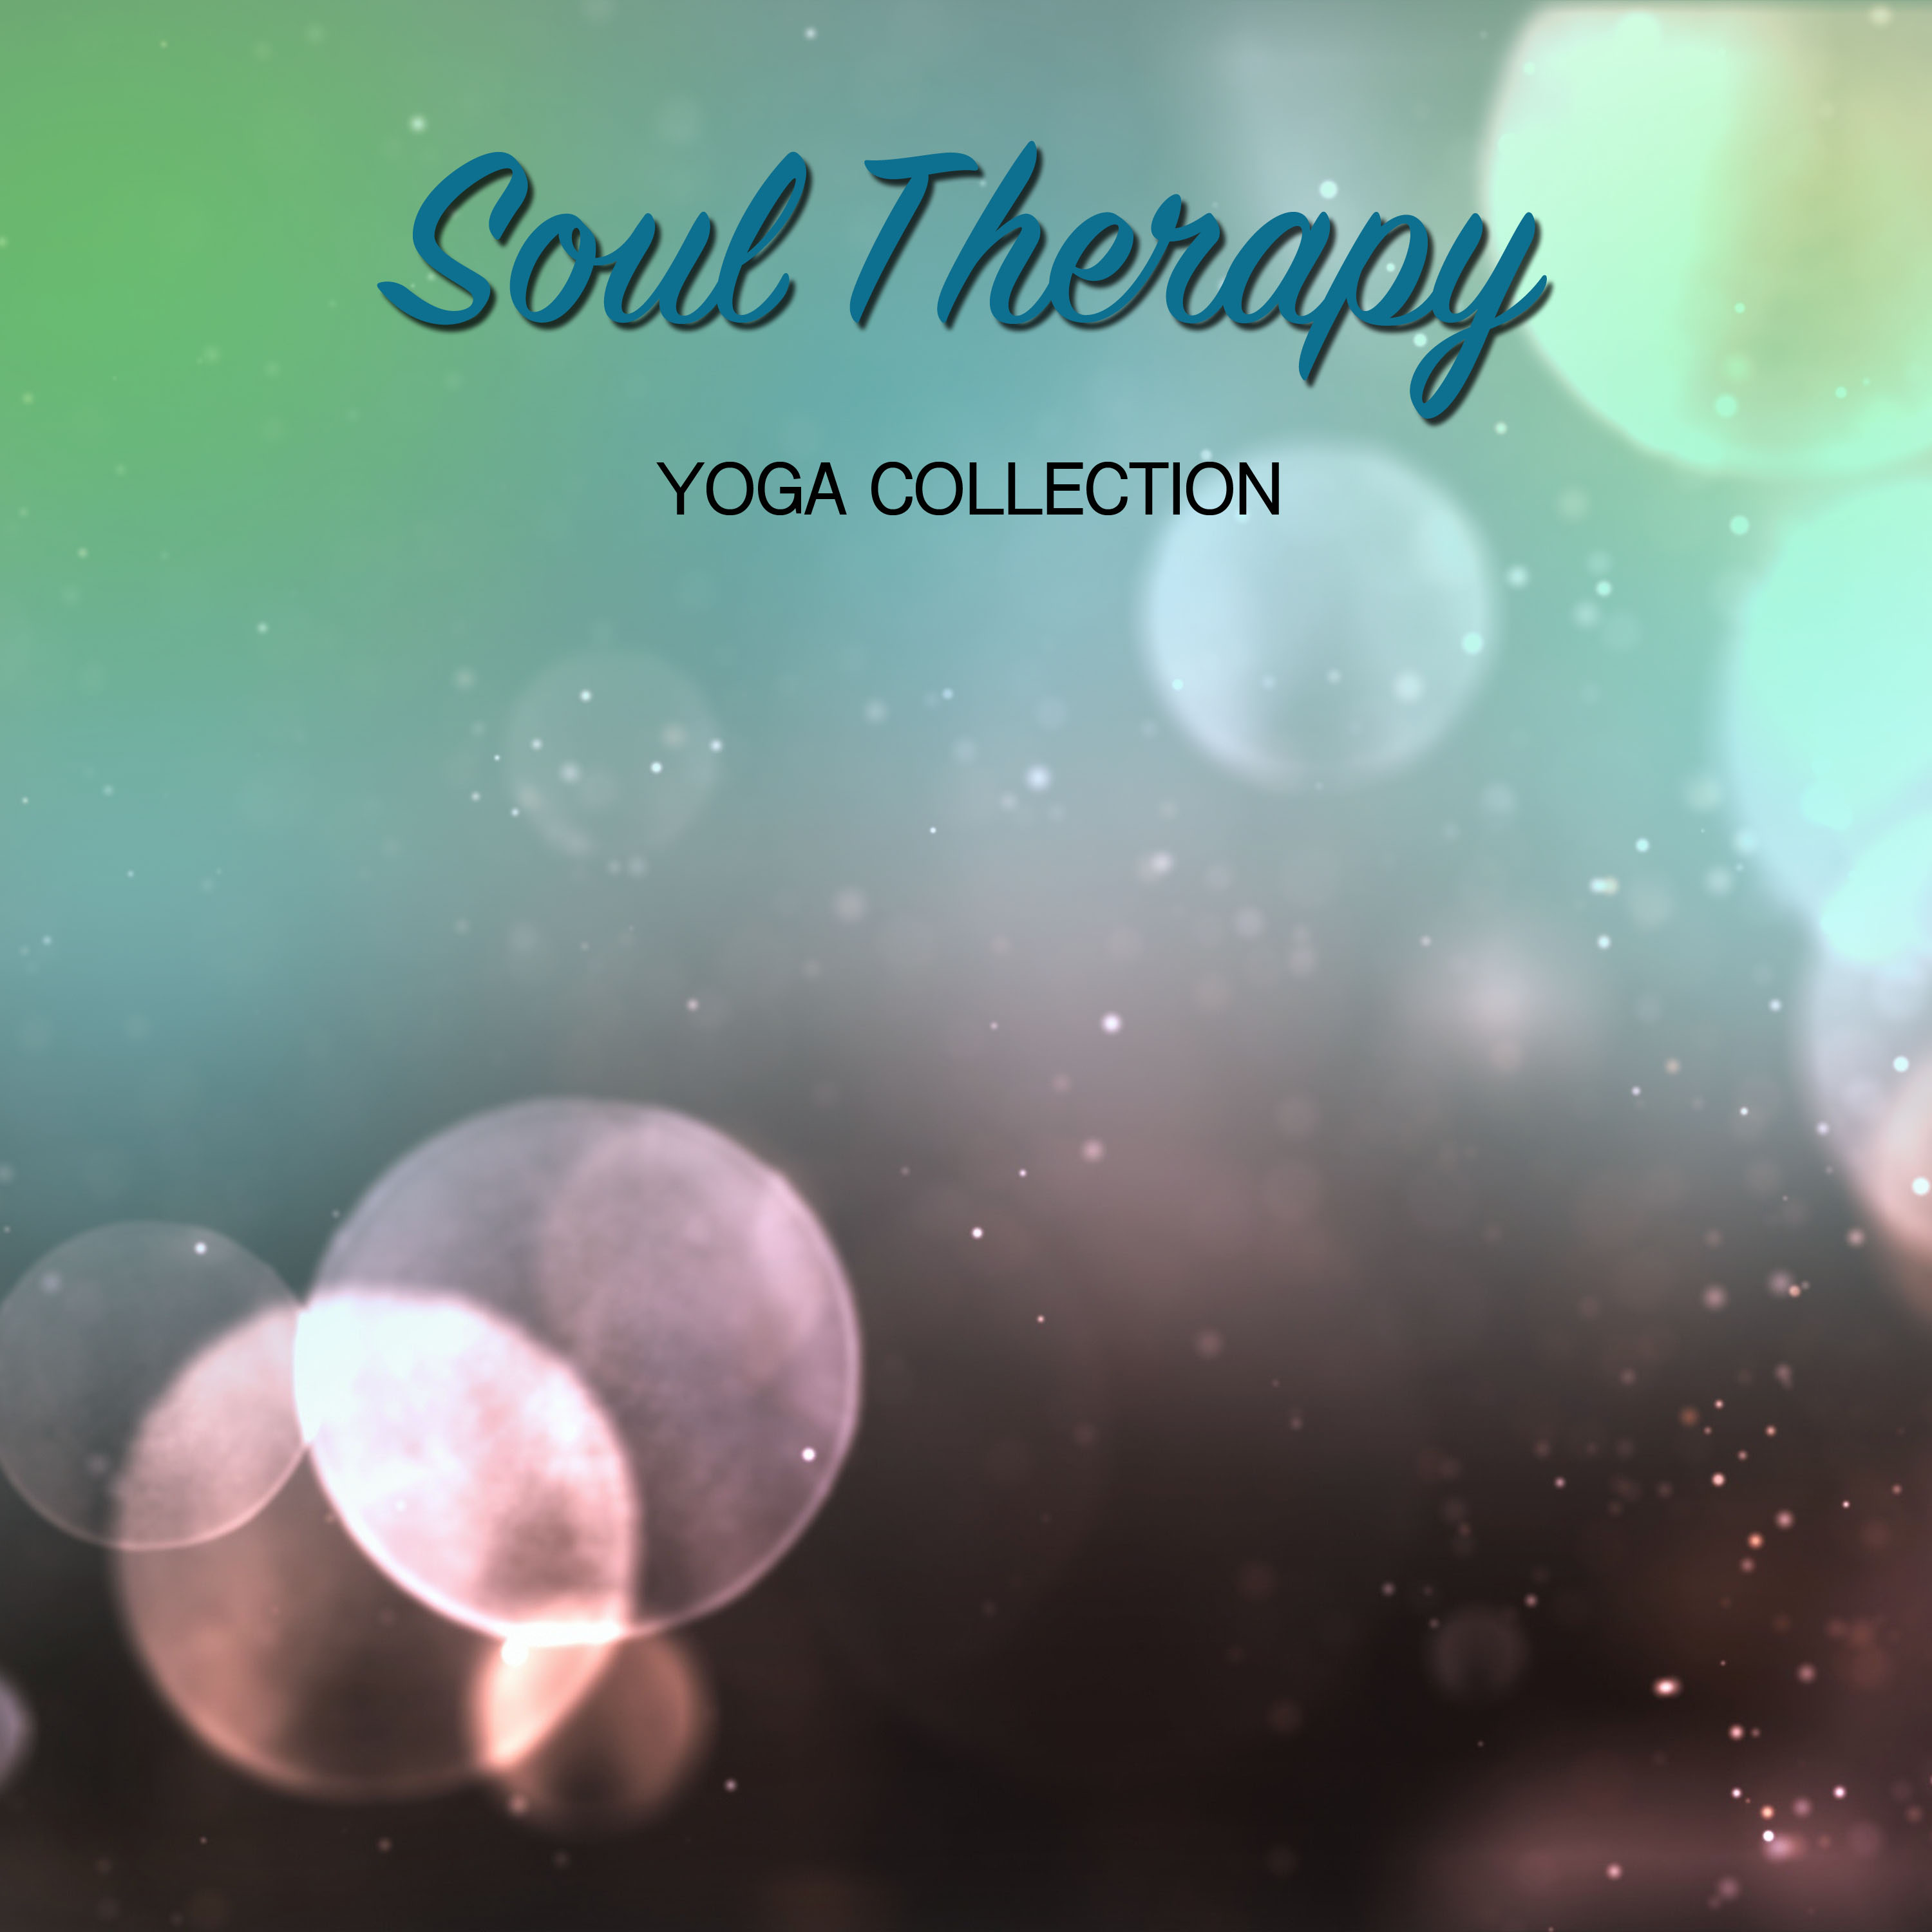 2018 A Yoga Collection: Soul Therapy